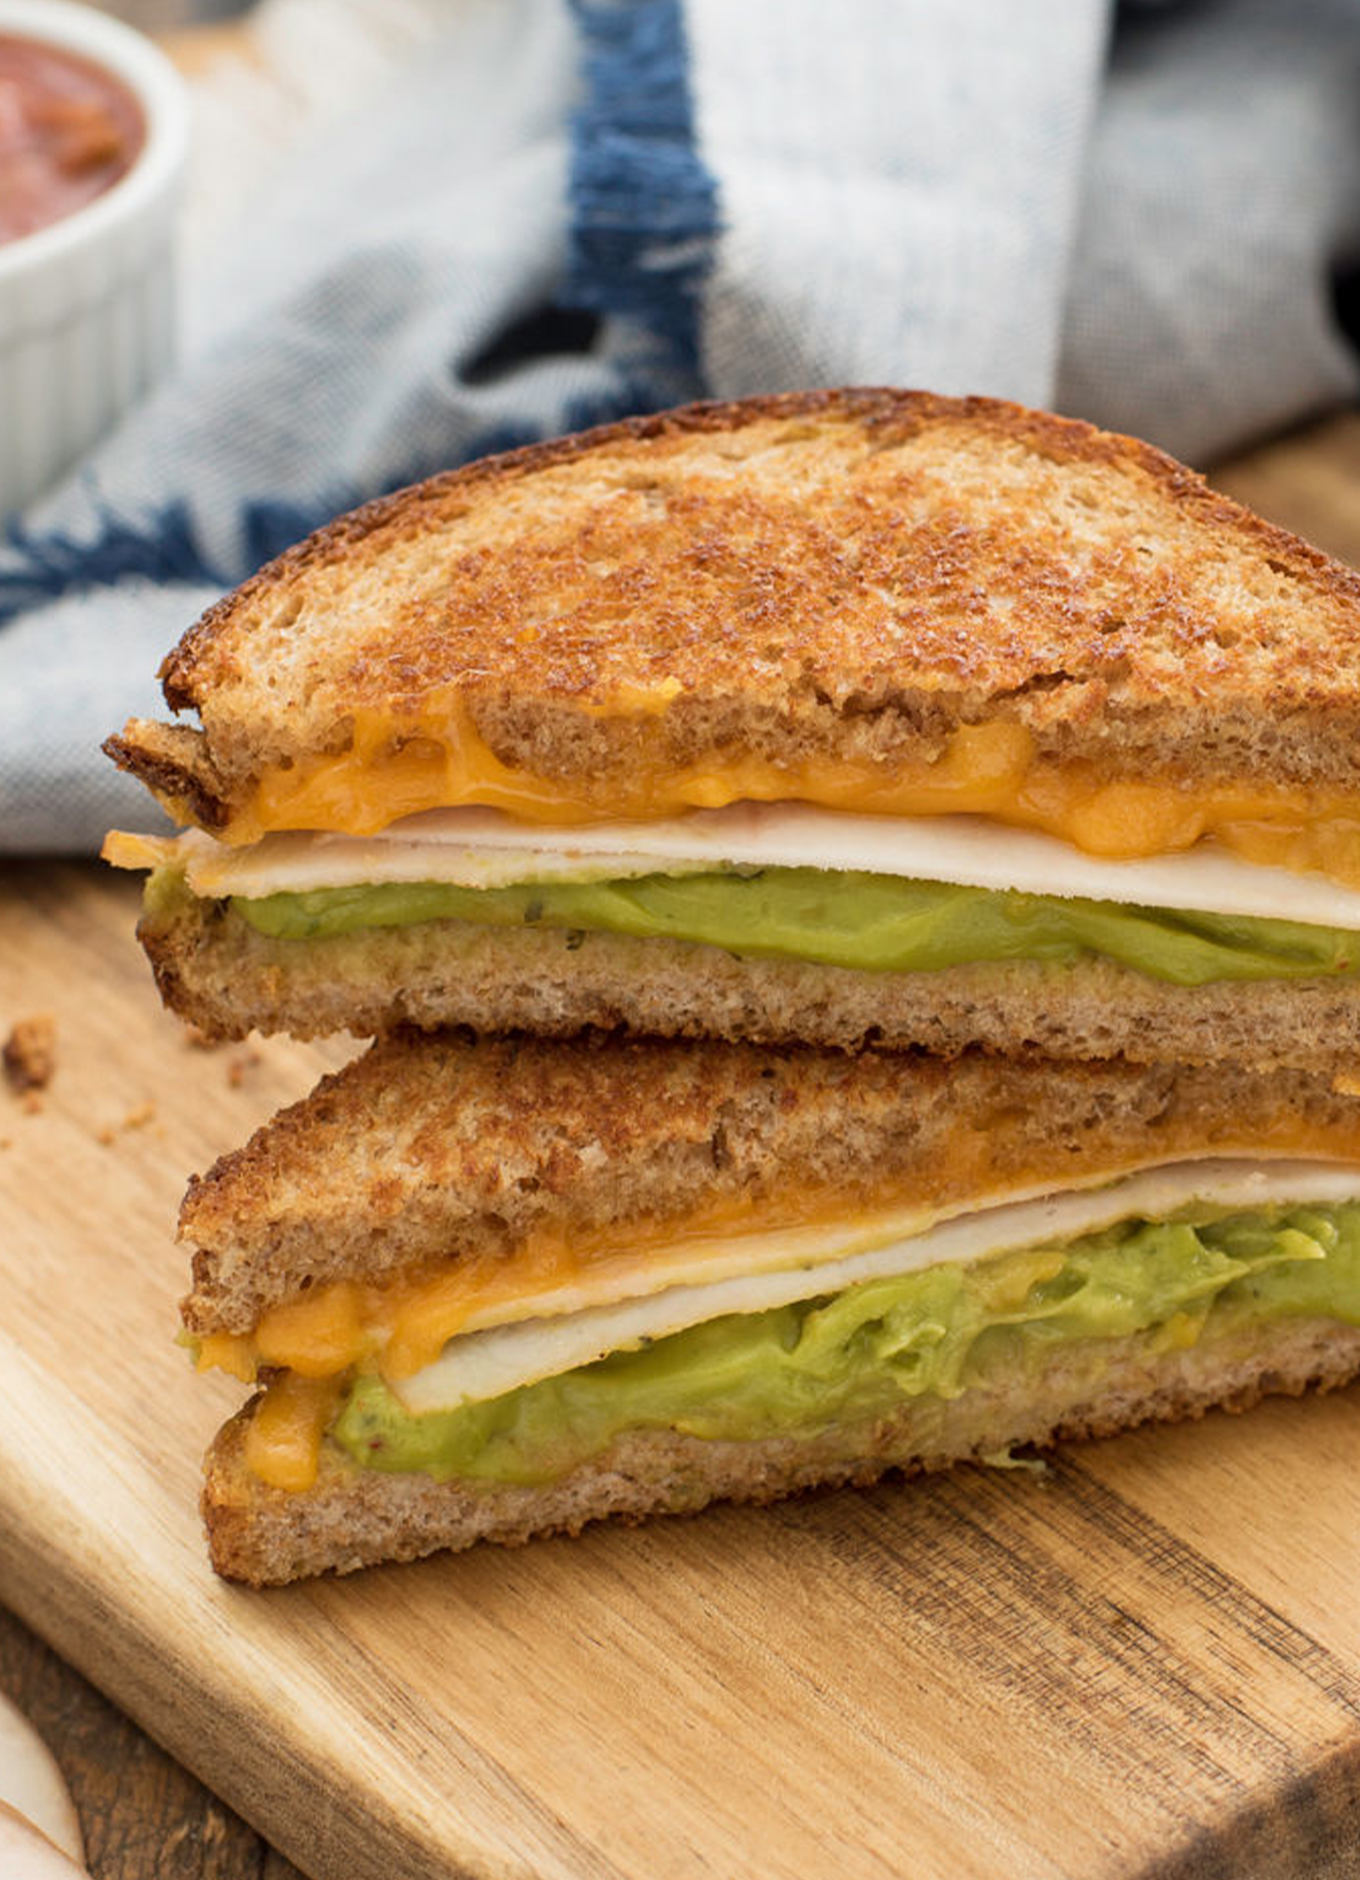 A cross section of a Chicken Guacamole Grilled Cheese on a wooden cutting board showing the deli slices, layer of guacamole, and the melted cheese